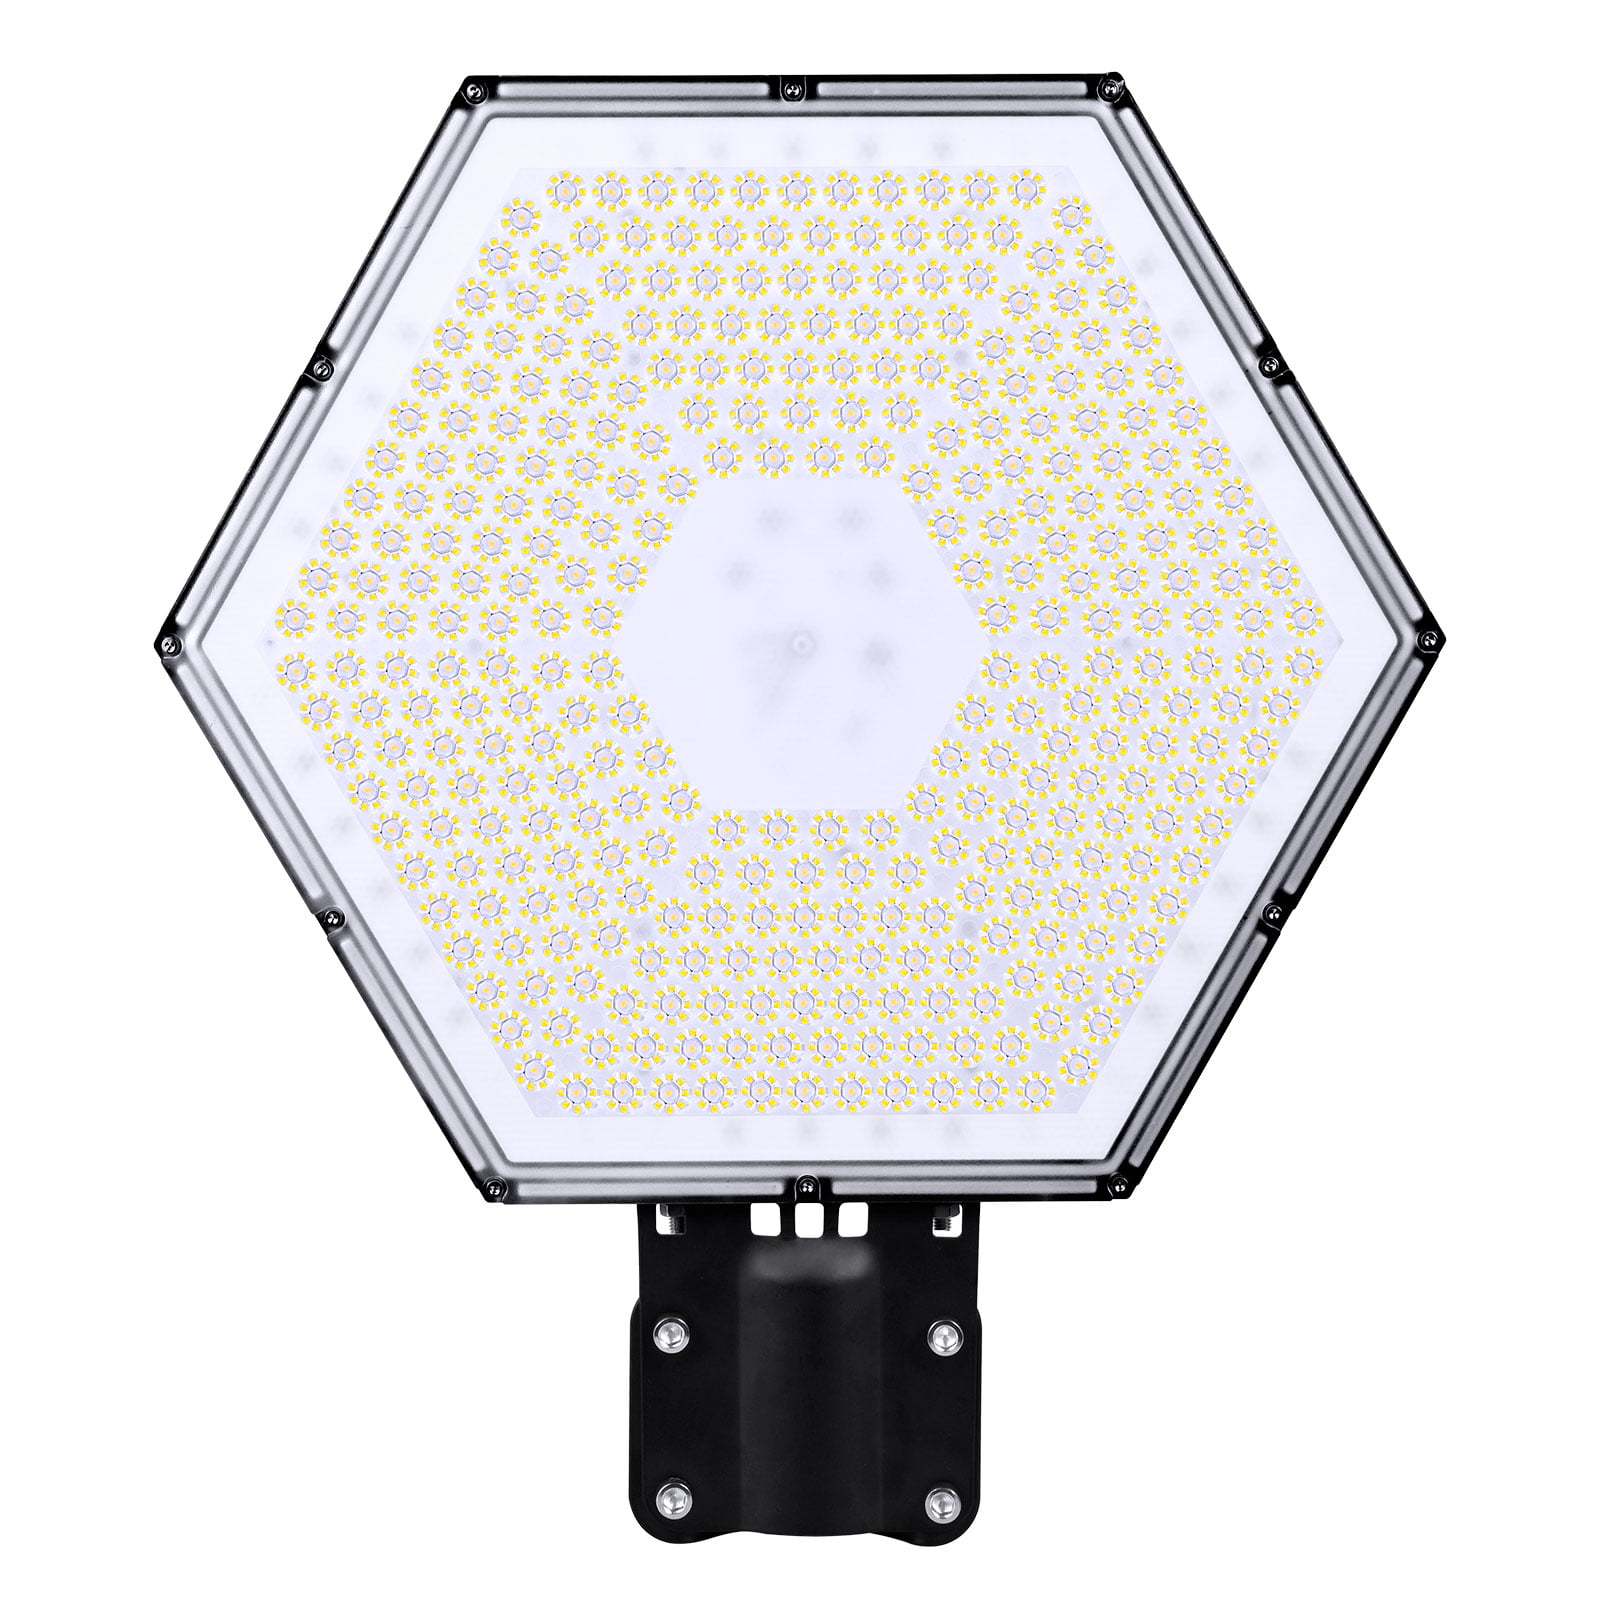 LED High Bay Light 300W/100W Warehouse Industrial Commercial Workshop Floodlight 